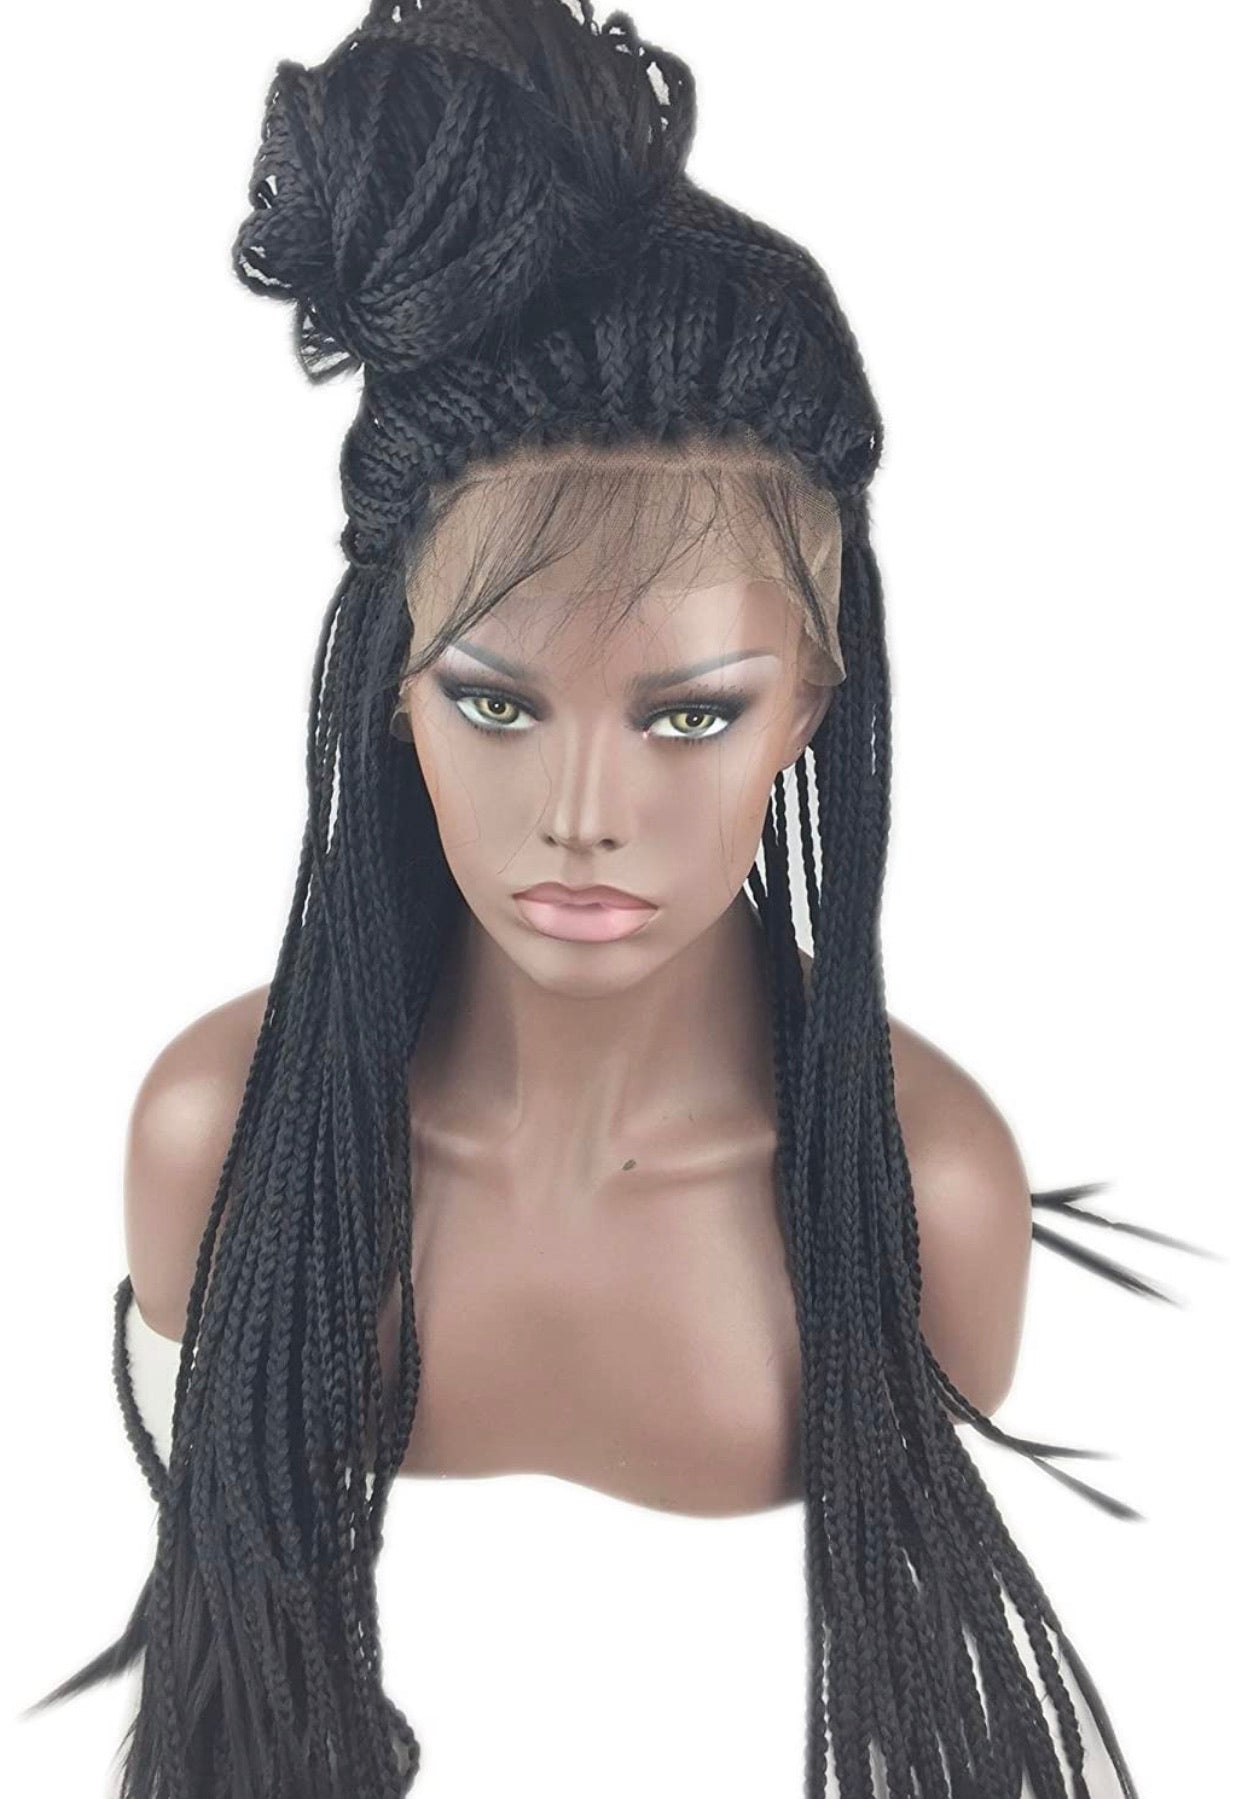 Glueless Micro Braid Extensions Lace Front Specialty Wigs-All That & More Salon Presents up to 50% off- Hope & Hair Breast Cancer Awareness Weekend Event